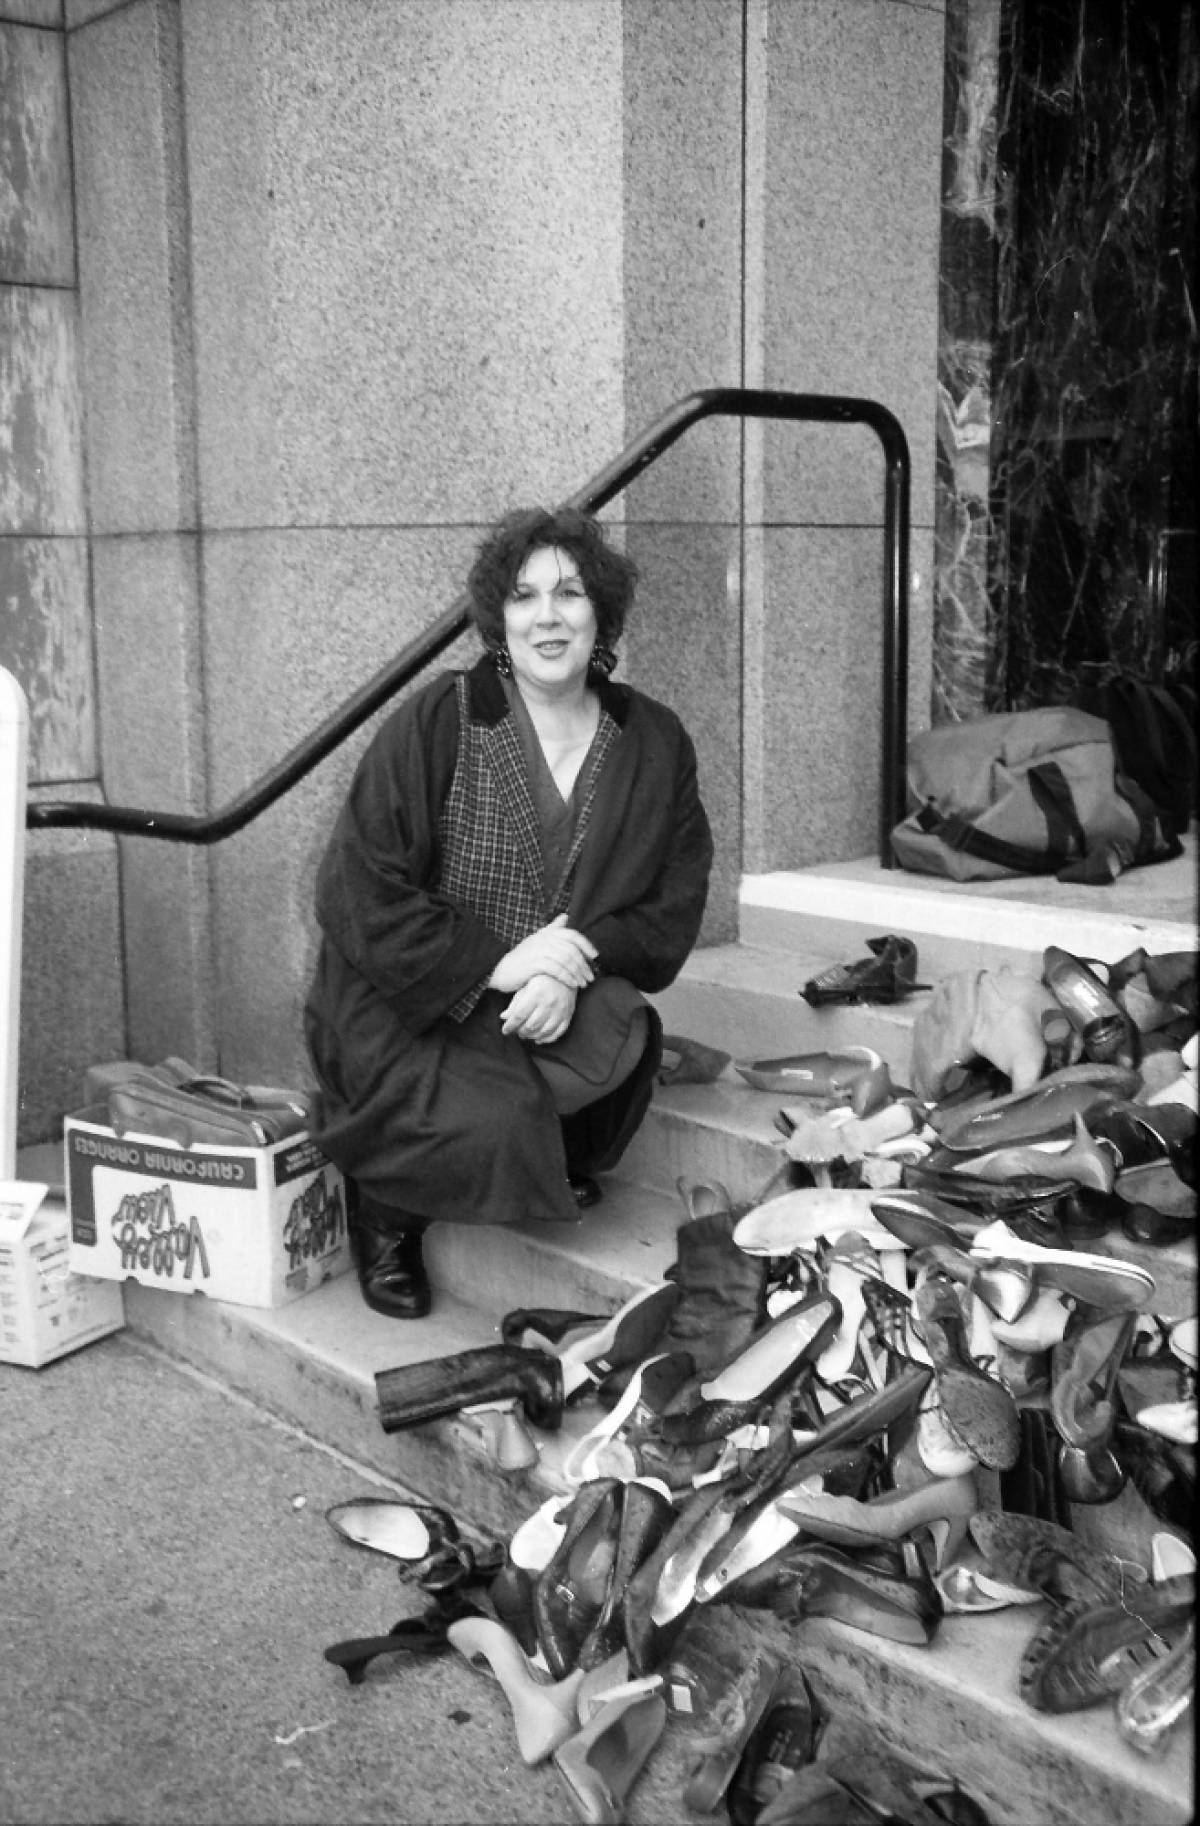 Jamie Lee Hamilton ensured politicians were reminded about missing women by dumping shoes on the steps of Vancouver City Hall.